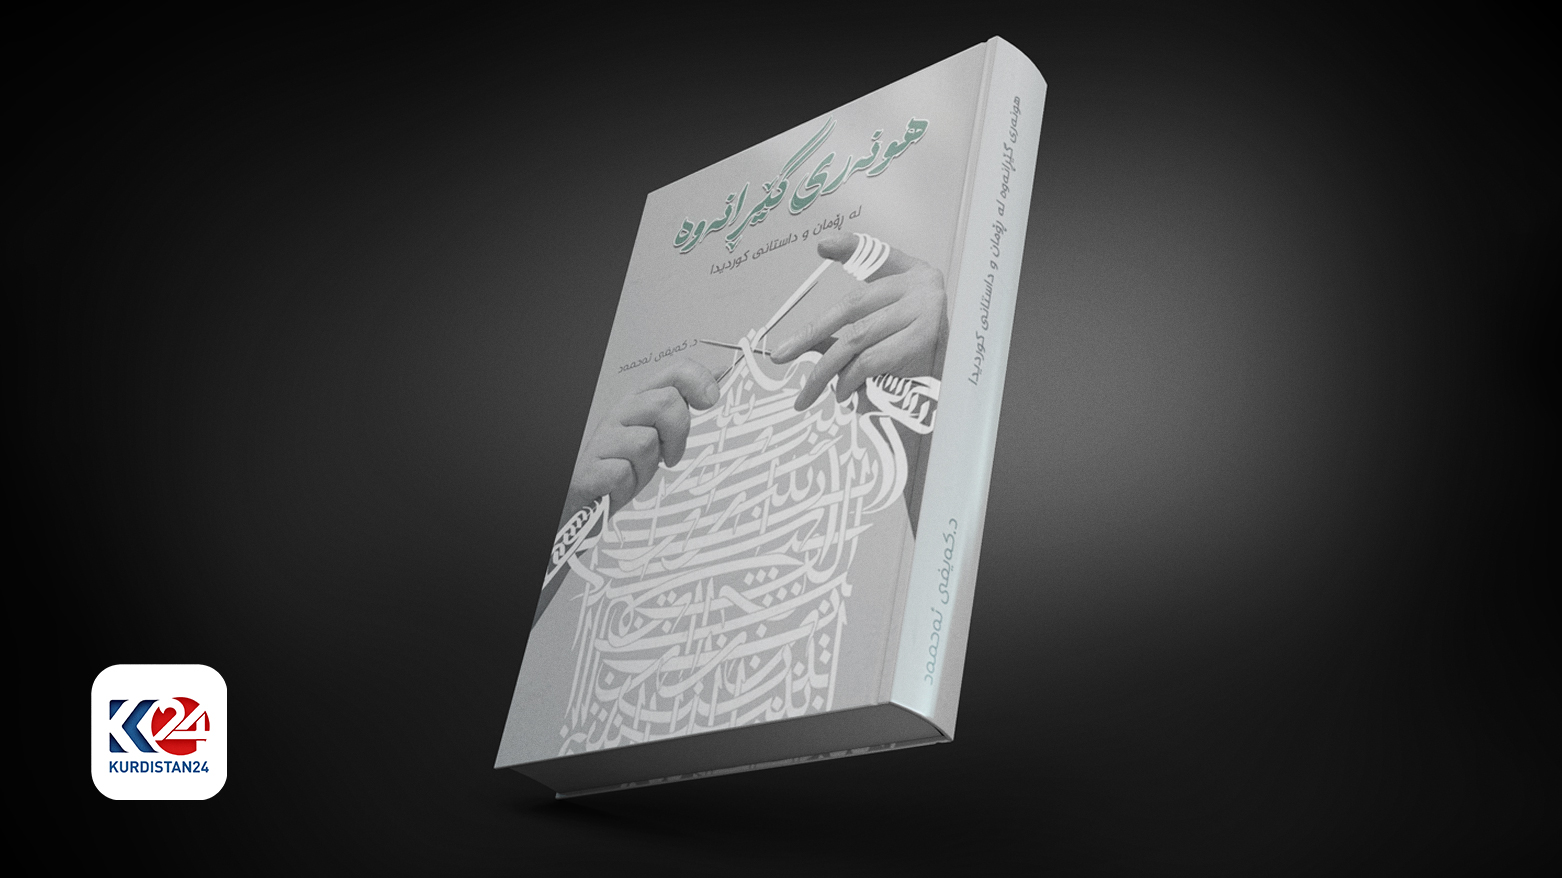 The published book titled "The Art of Narrative in Kurdish Novels and Stories" by Dr. Keyfi Ahmad. (Photo: Kurdistan 24)